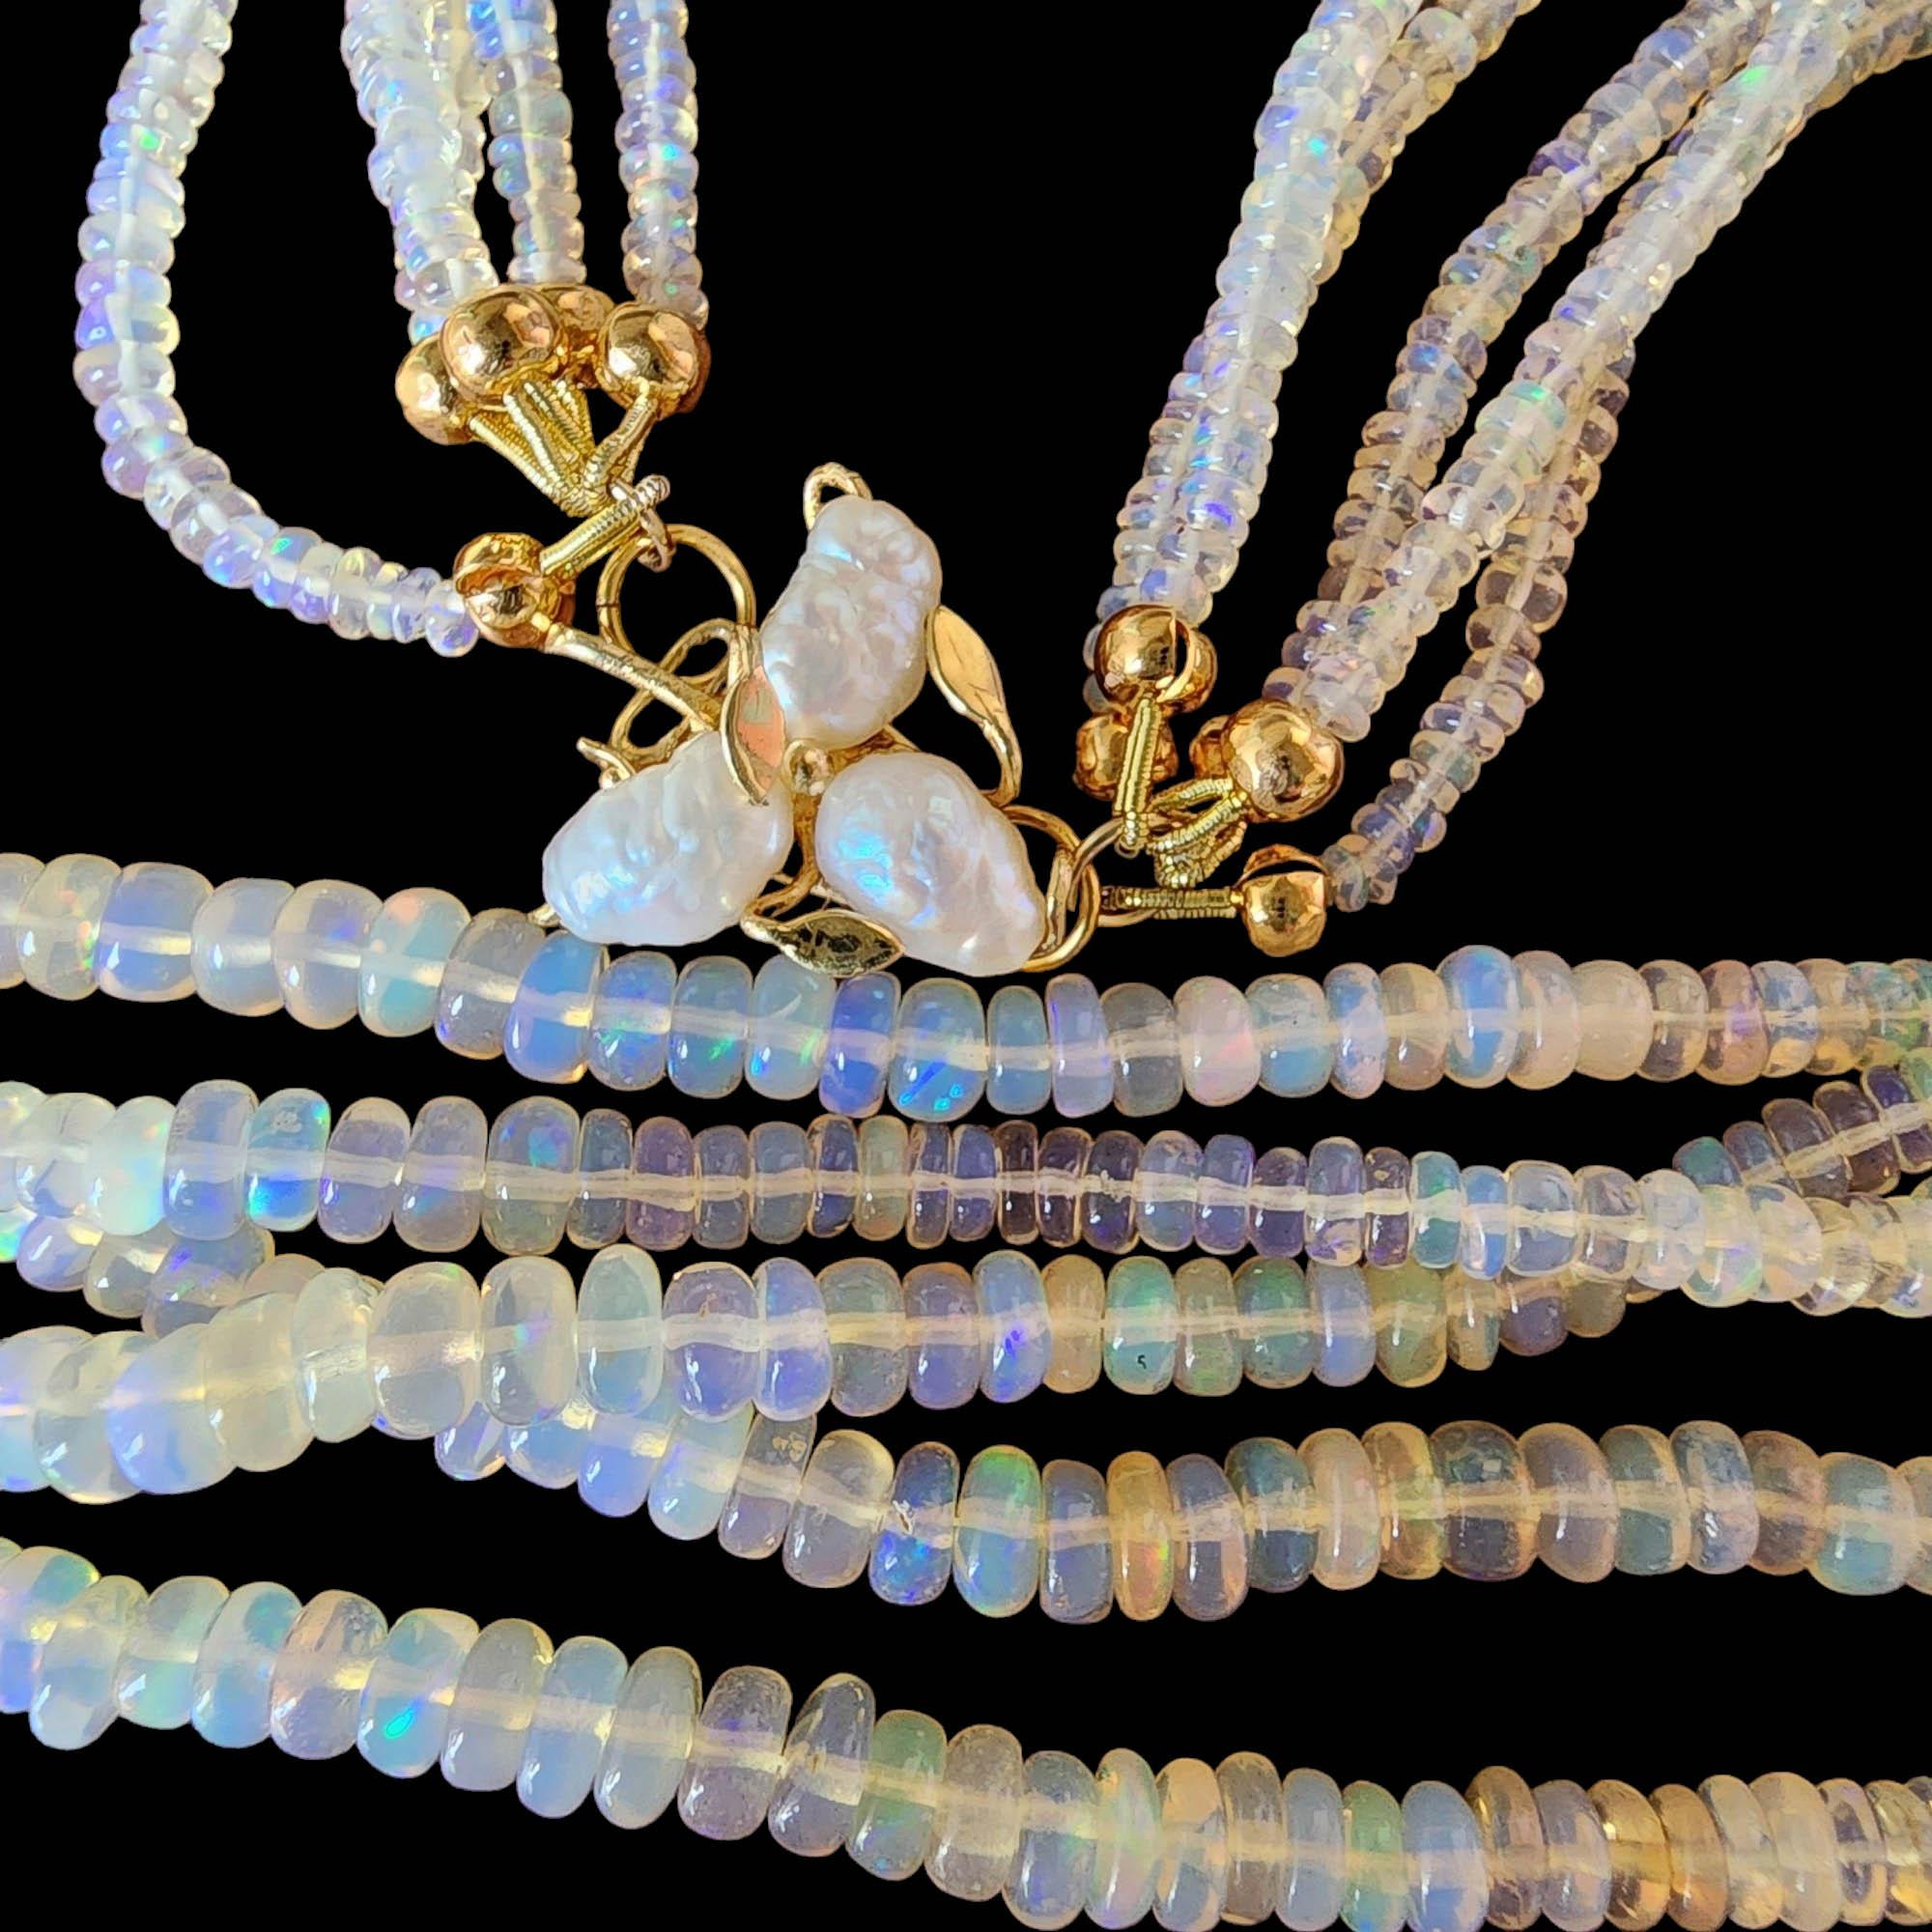 Women's or Men's Vintage Multi-Strand Opal Bead Necklace, 14k Gold Clasp With Pearls For Sale